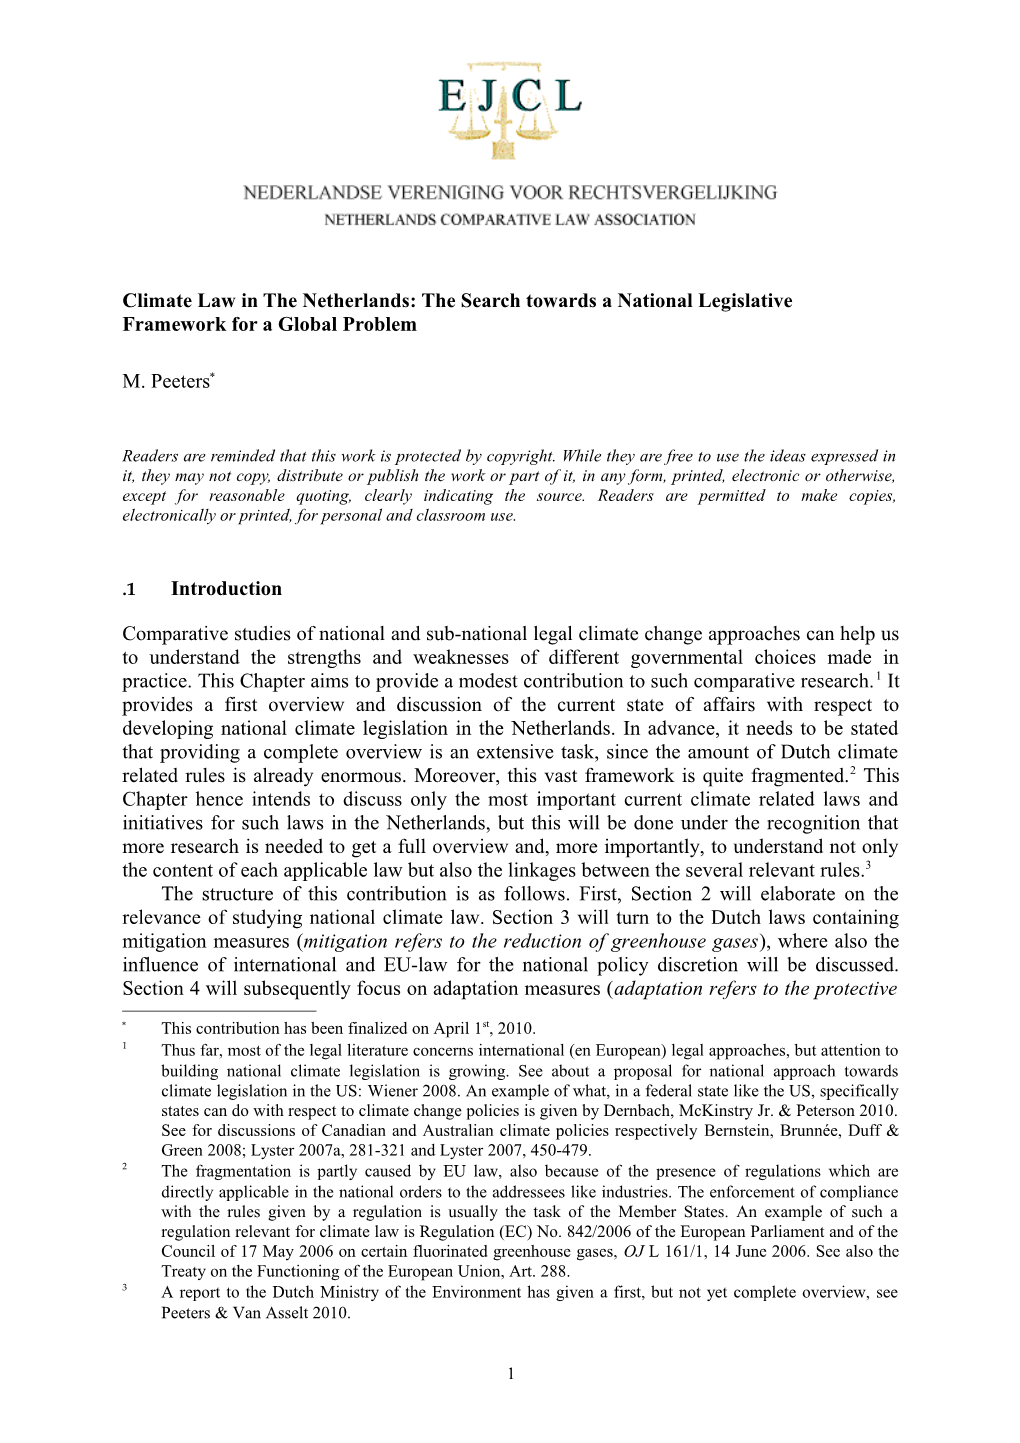 Climate Law in the Netherlands: the Search Towards a National Legislative Framework For